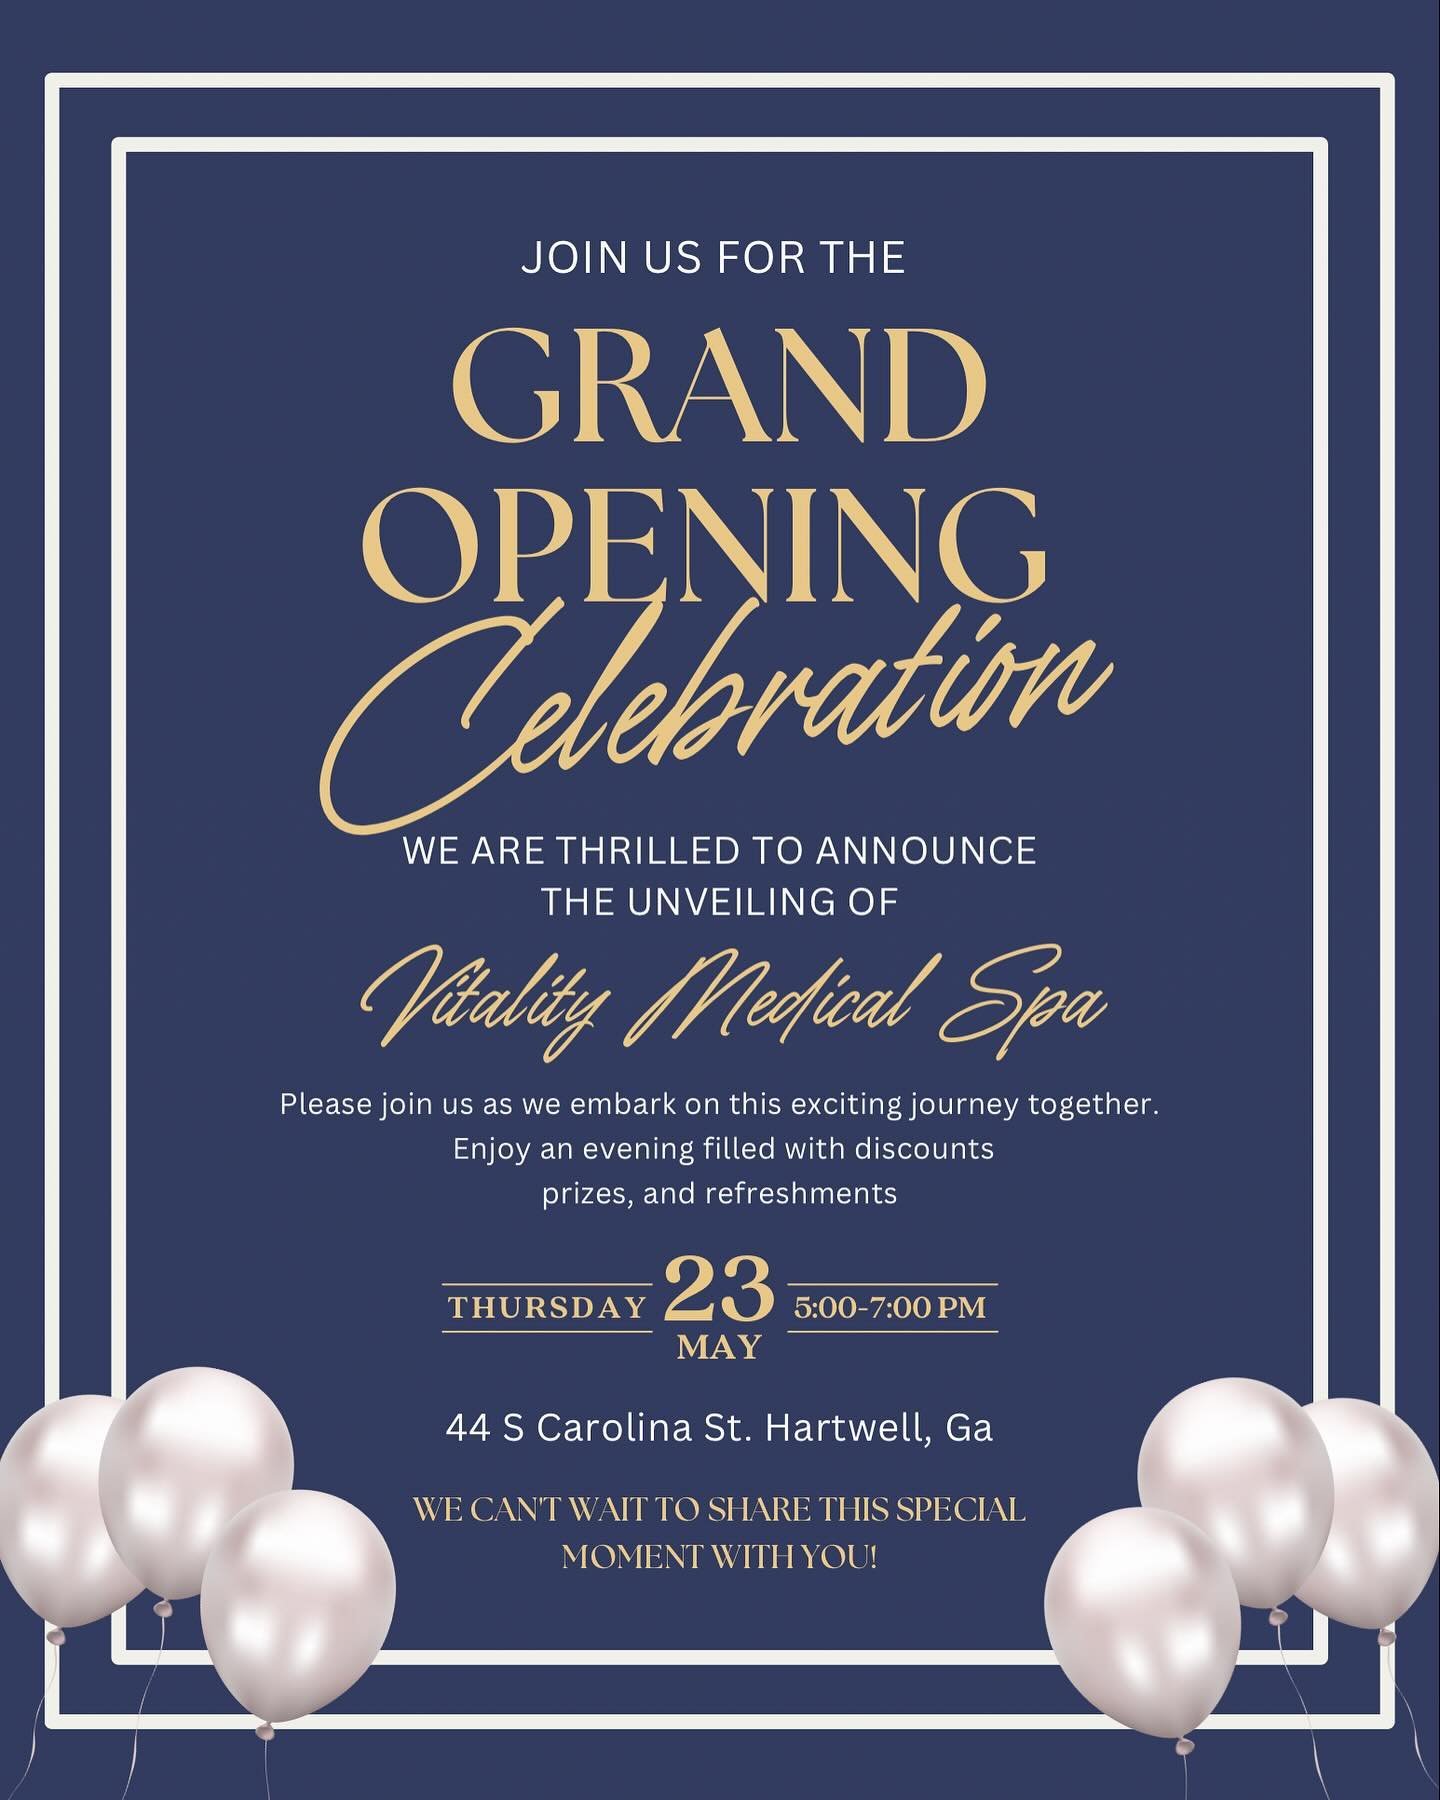 Join us for the Grand Opening of our new location for Vitality Medical Spa! 🤩

Date: Thursday, May 23rd 
Time: 5-7:00pm
Location: 44 S Carolina St. , Hartwell Ga

Enjoy complimentary refreshments, exclusive discounts on services, and giveaways throu